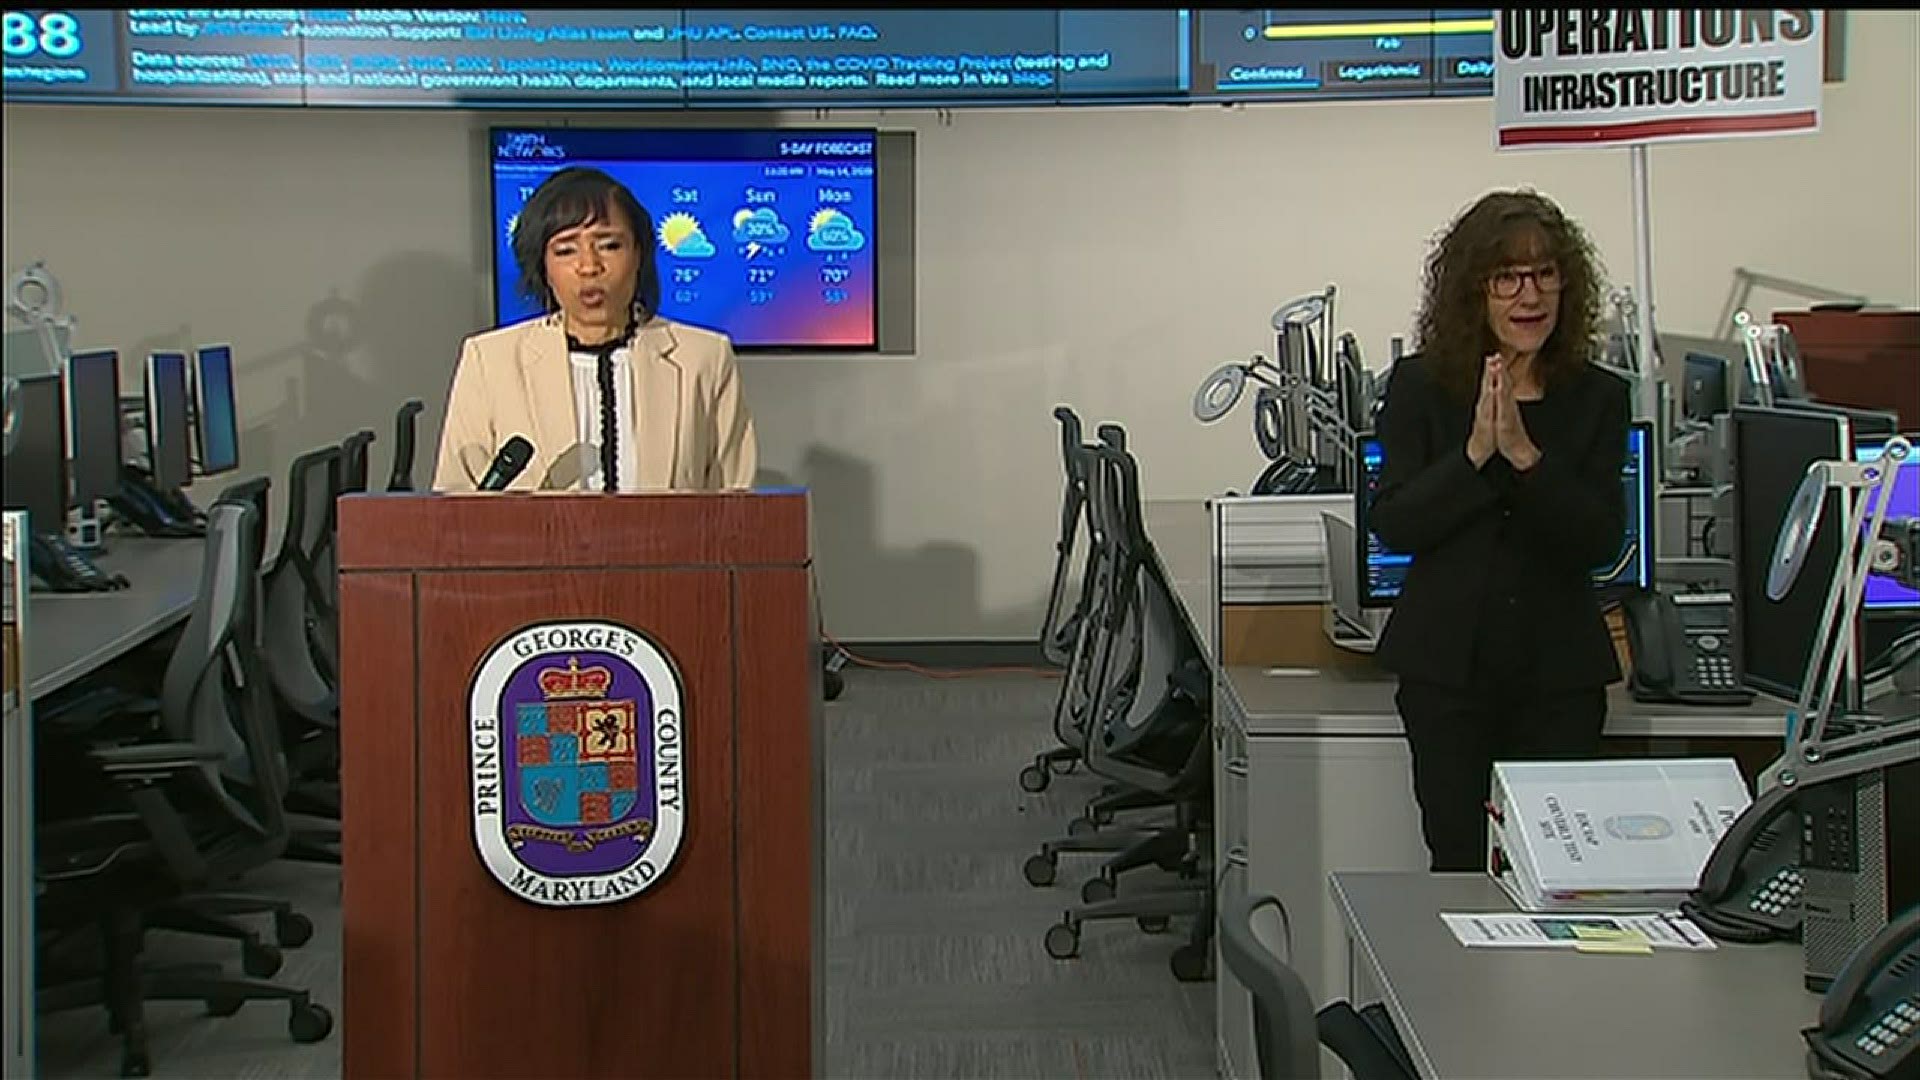 "Quite frankly we cant reopen because we don't have the resources to do so safely," said Prince George's County Executive, Angela Alsobrooks at a presser today.